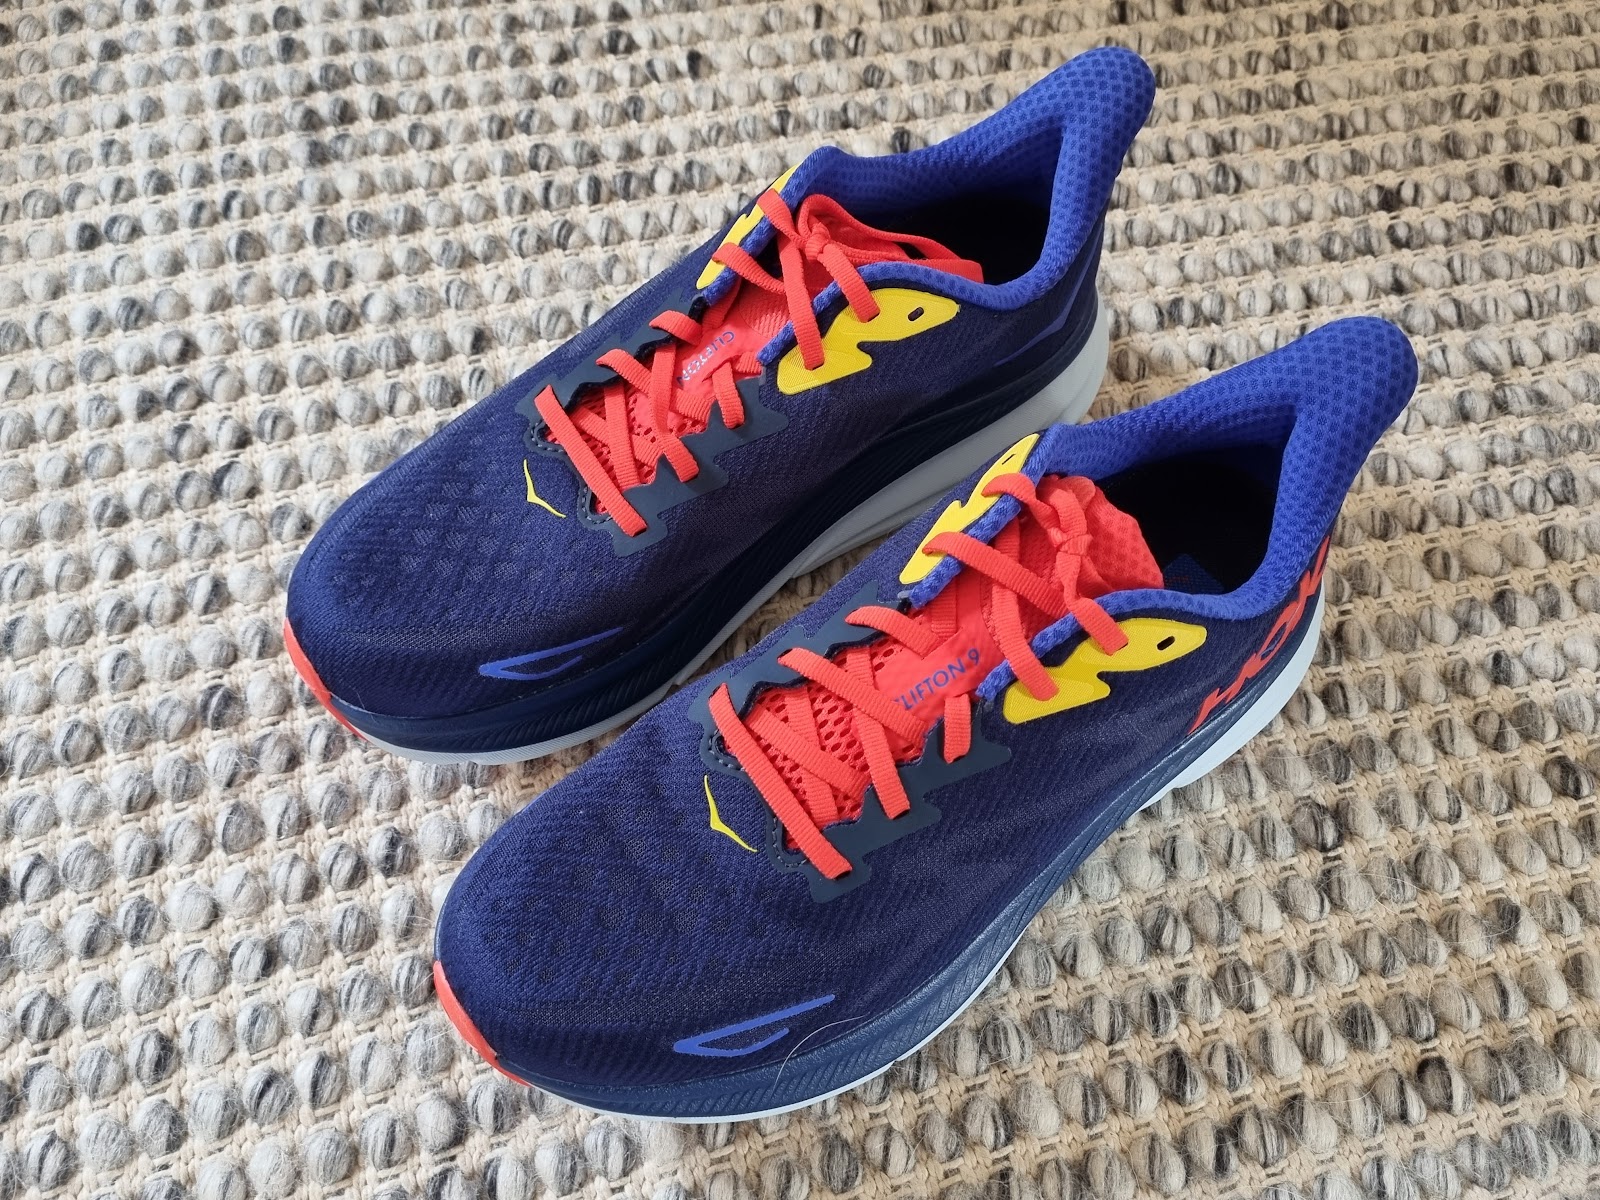 Hoka Clifton 9 First Impression Review & Comparisons 